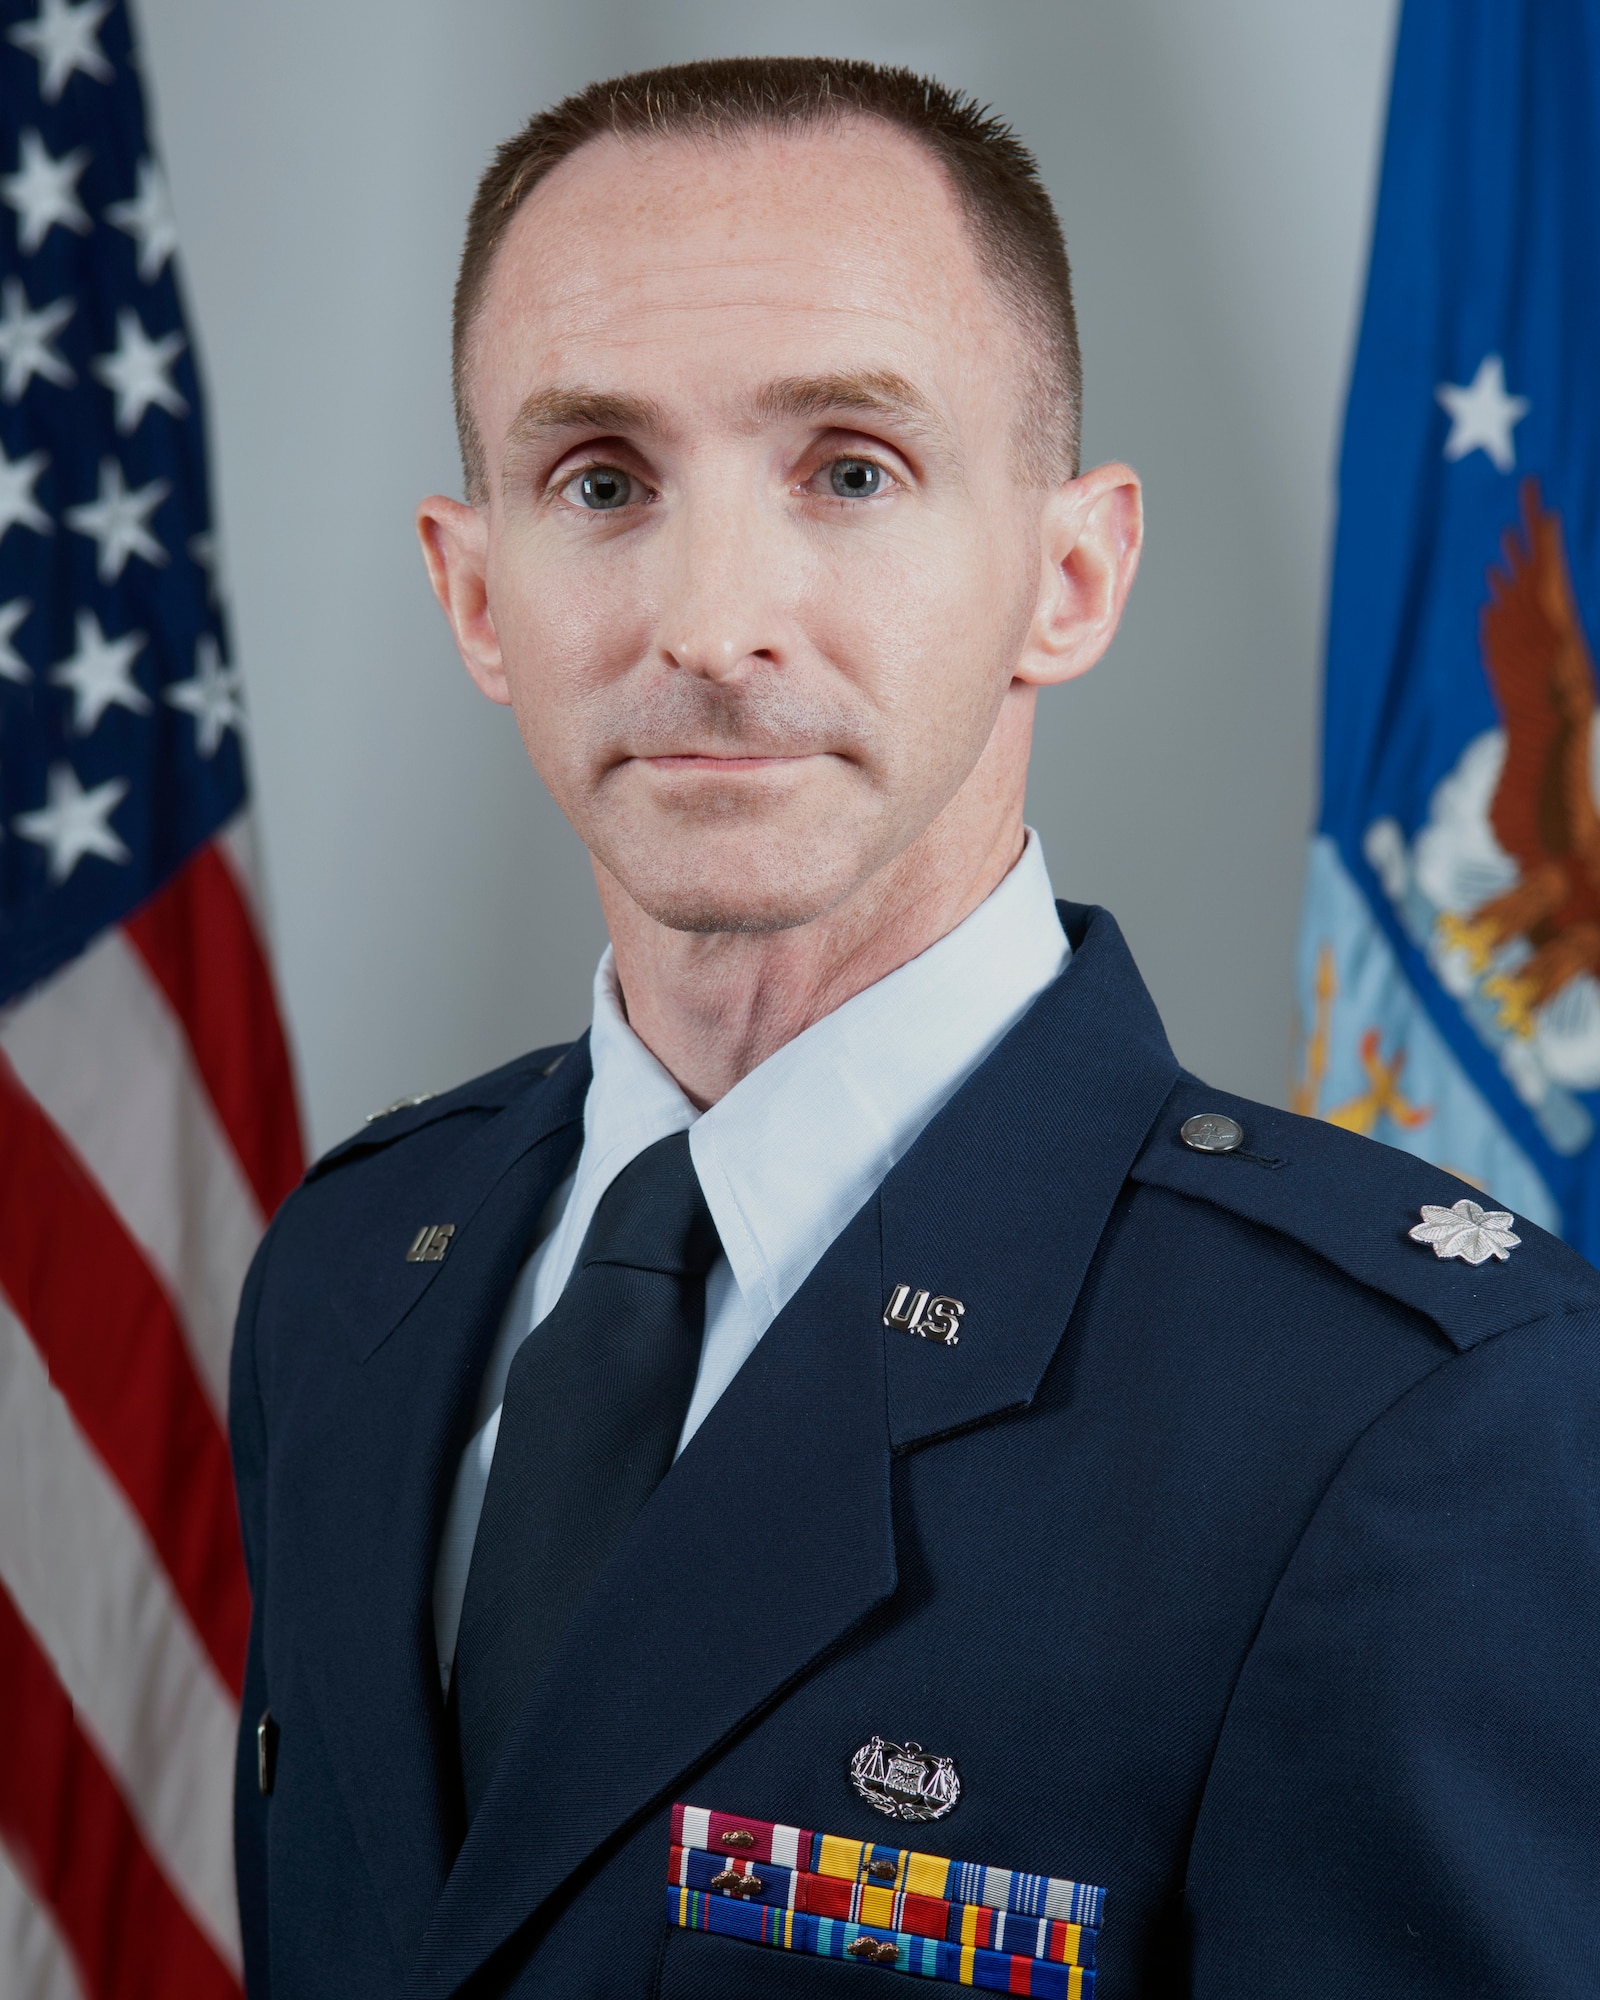 Lt. Col. Flannery, 434th Air Refueling Wing staff judge advocate, poses for an official portrait at Grissom Air Reserve Base, Ind.